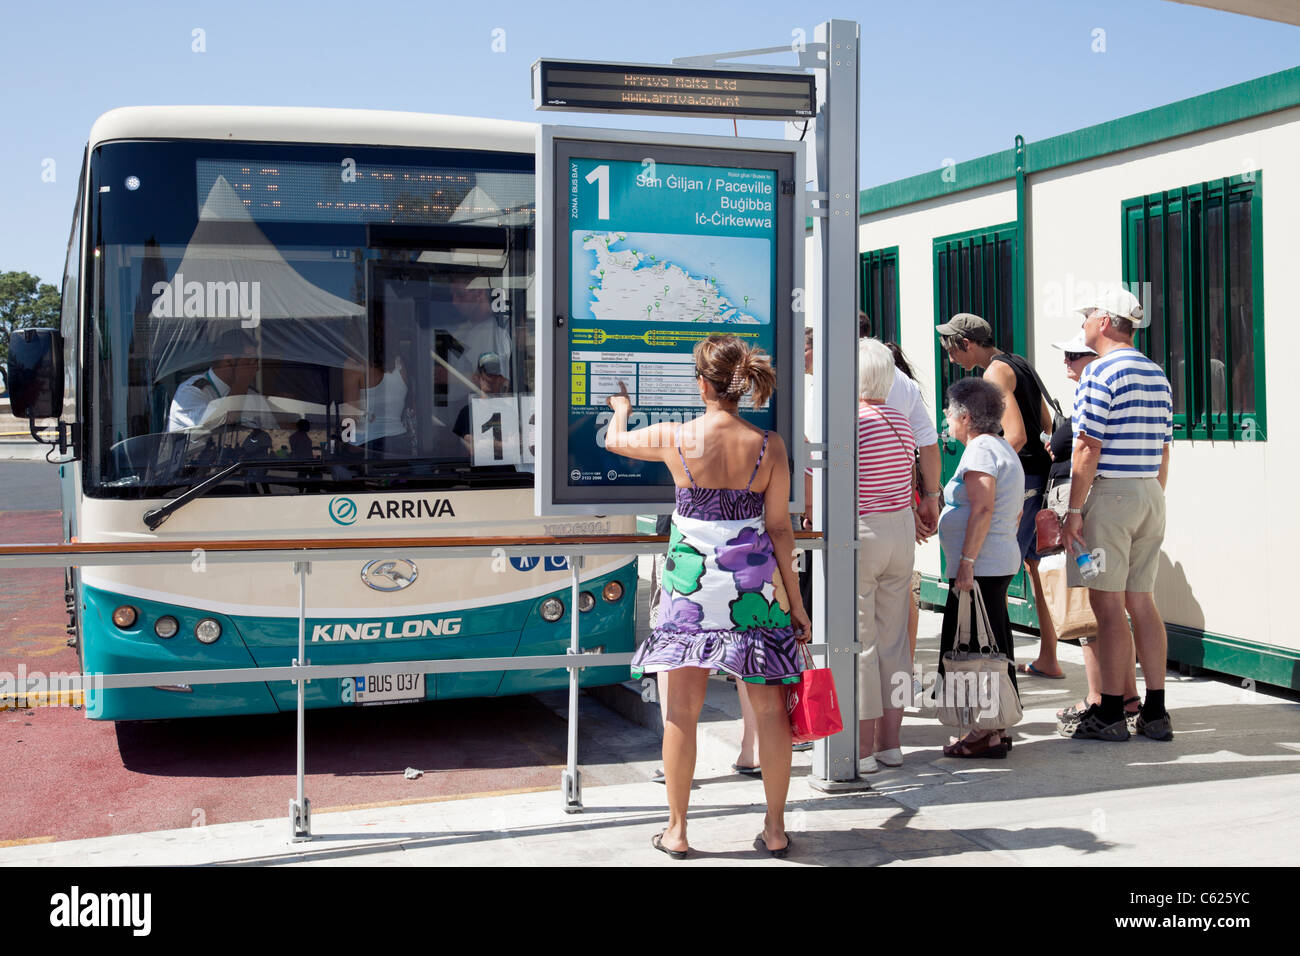 Malta's brand new bus service. Aquamarine coloured buses started to run on 3 July, 2011. Stock Photo